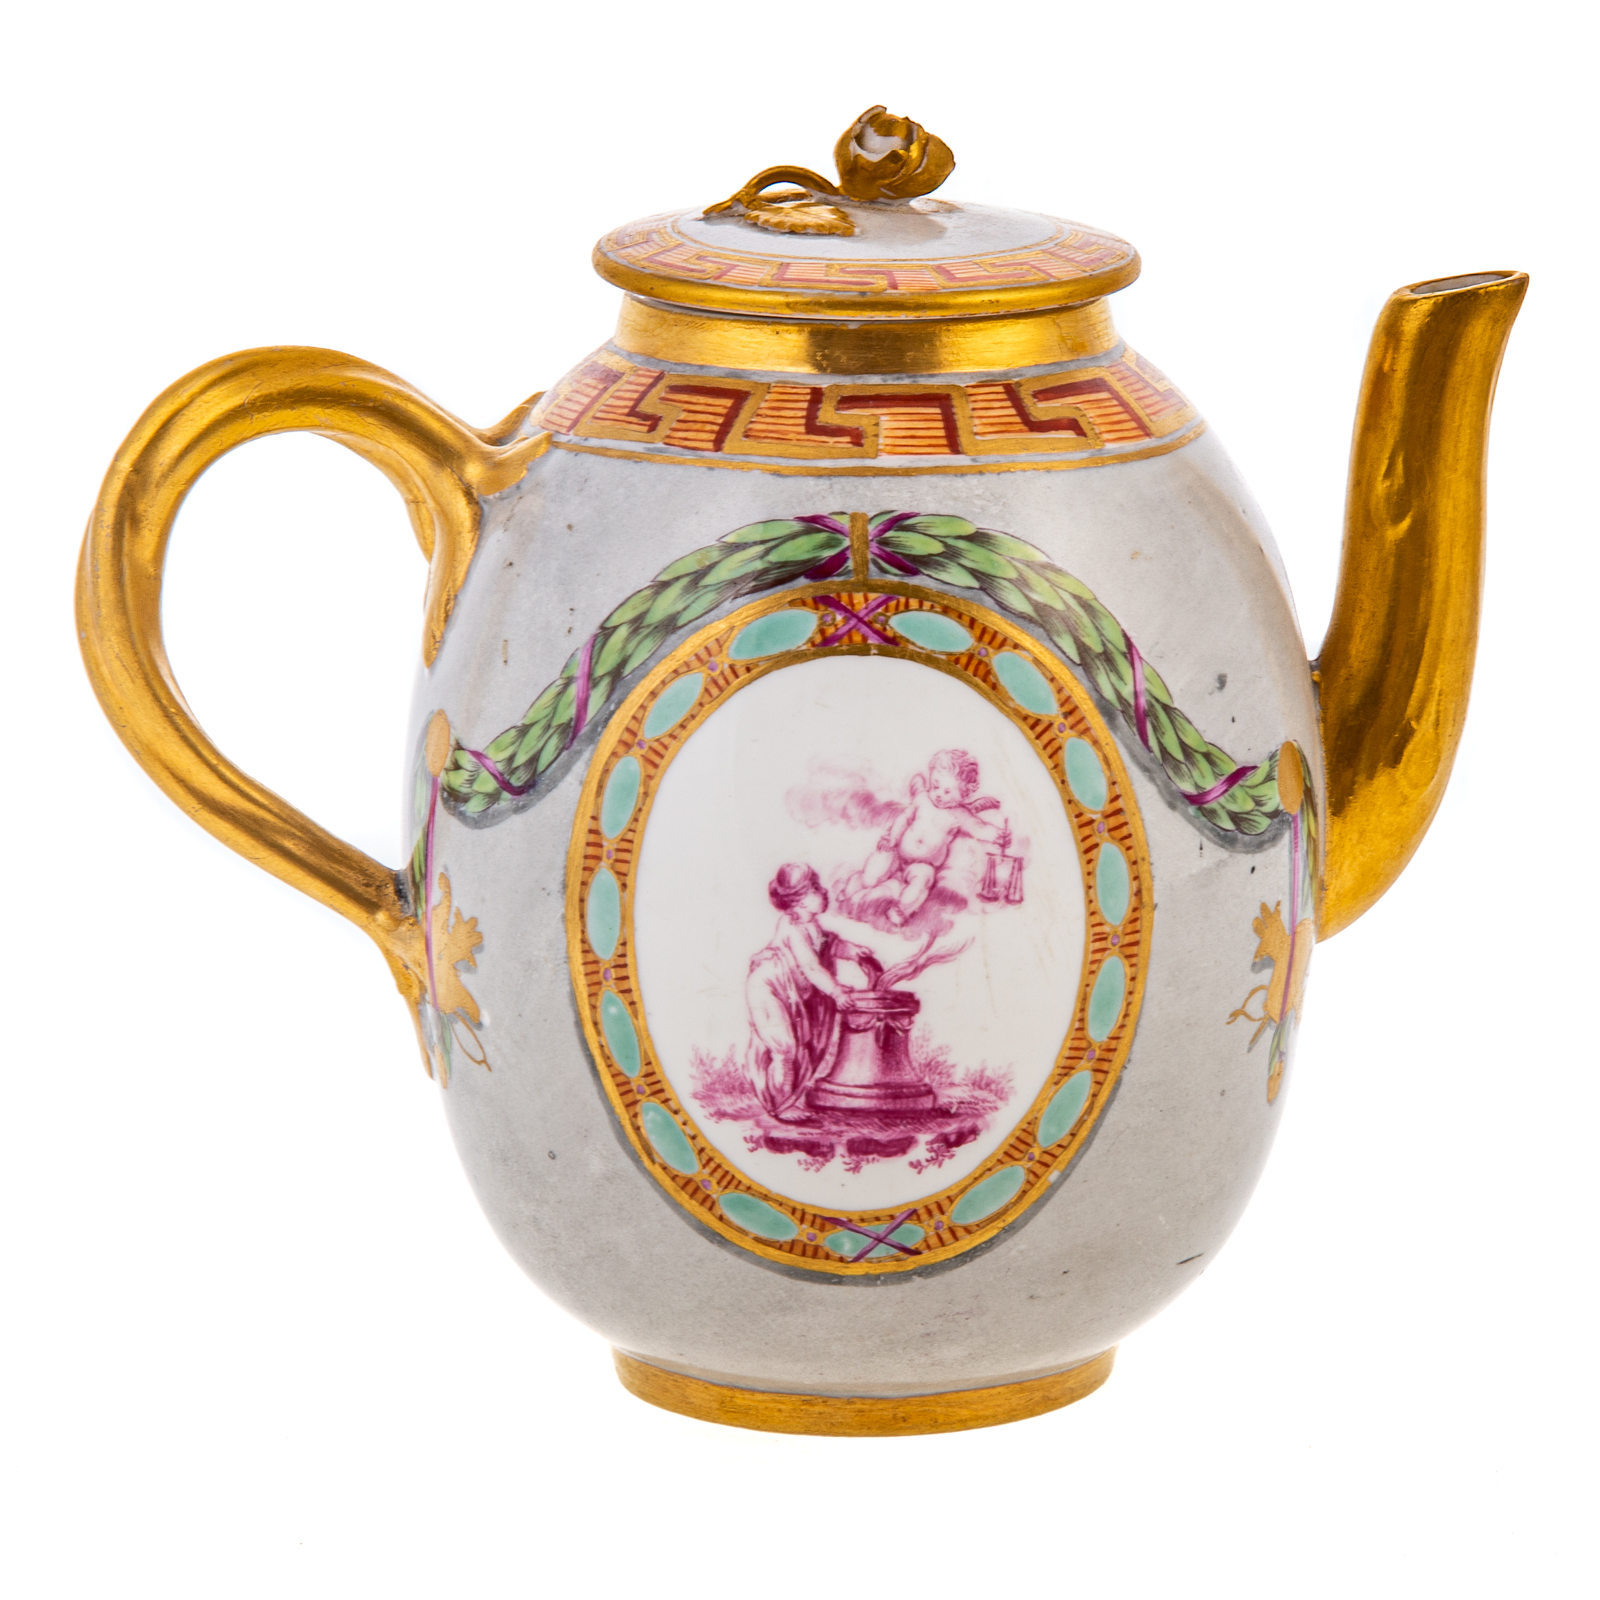 HOCHST PORCELAIN SMALL TEAPOT Late18th/early